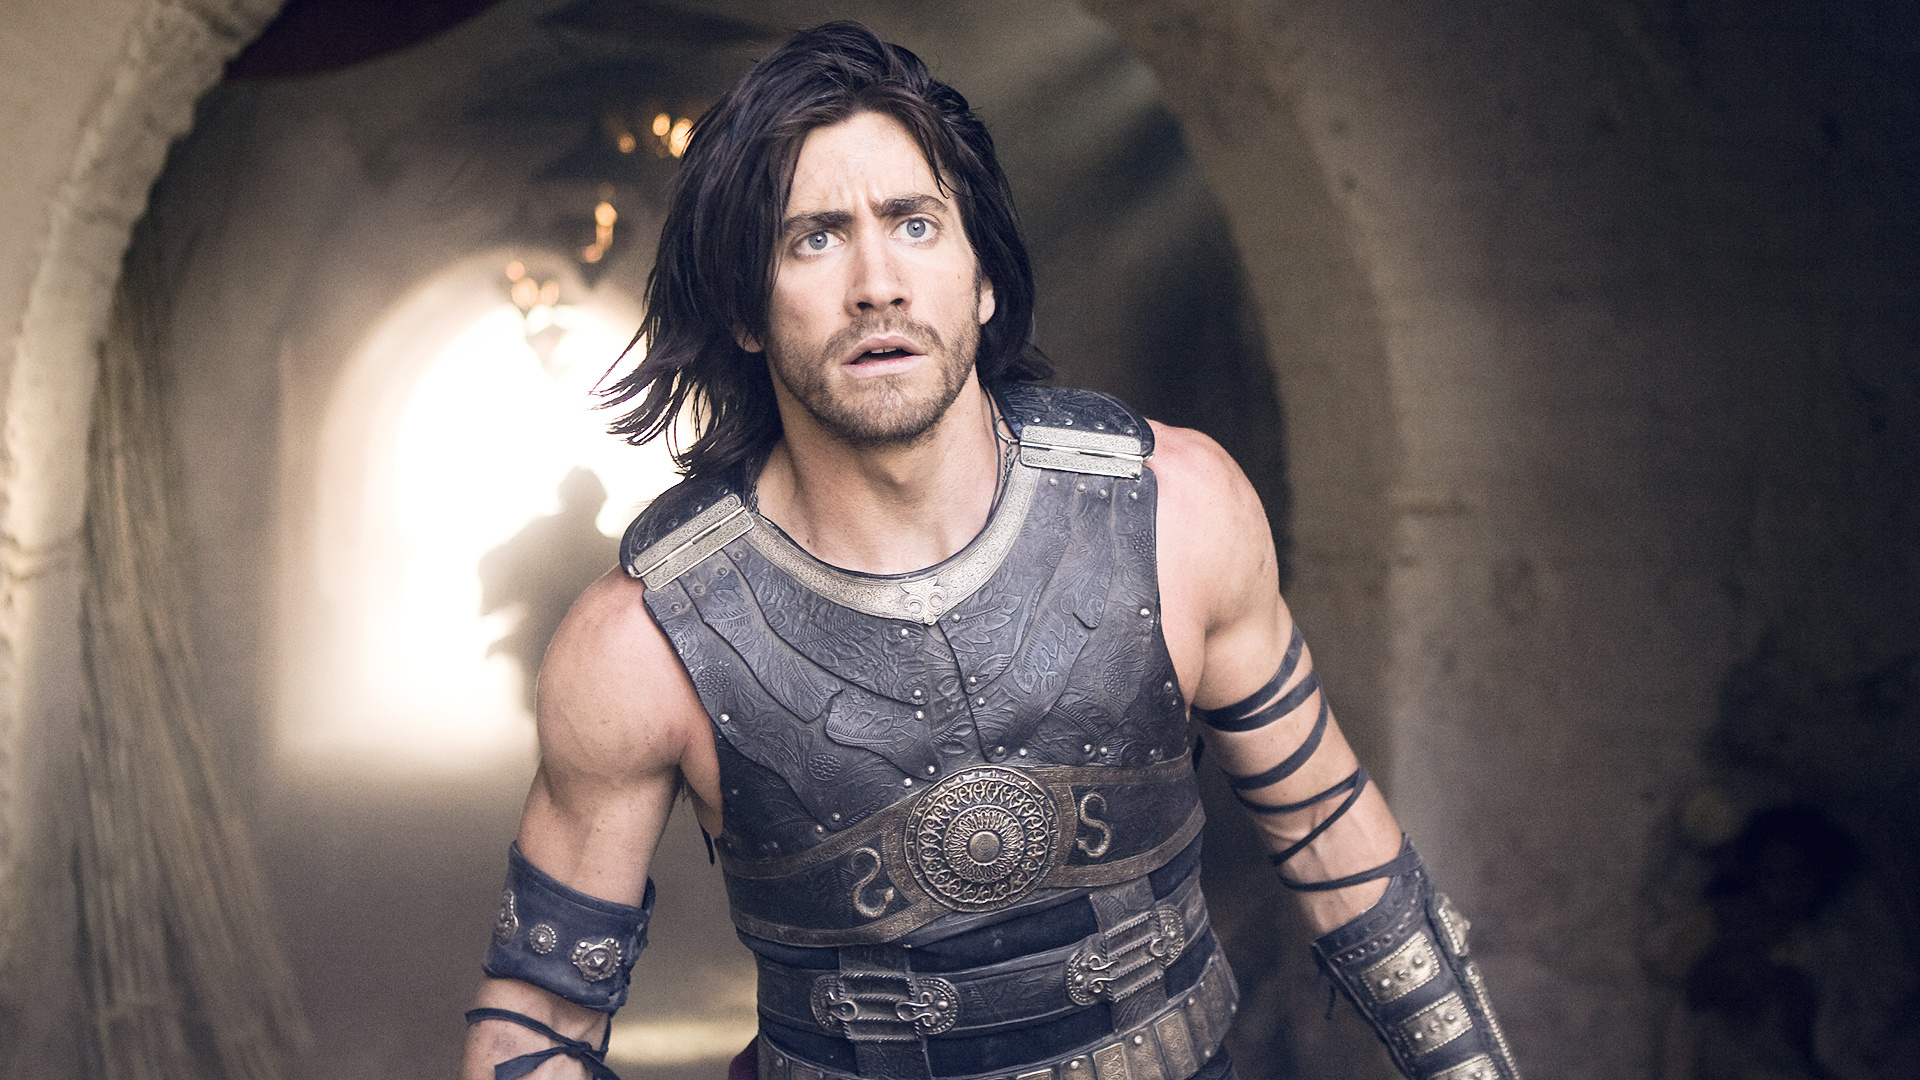 Prince of Persia (Movie): Dastan, Started as a street urchin in Nasaf. 1920x1080 Full HD Wallpaper.